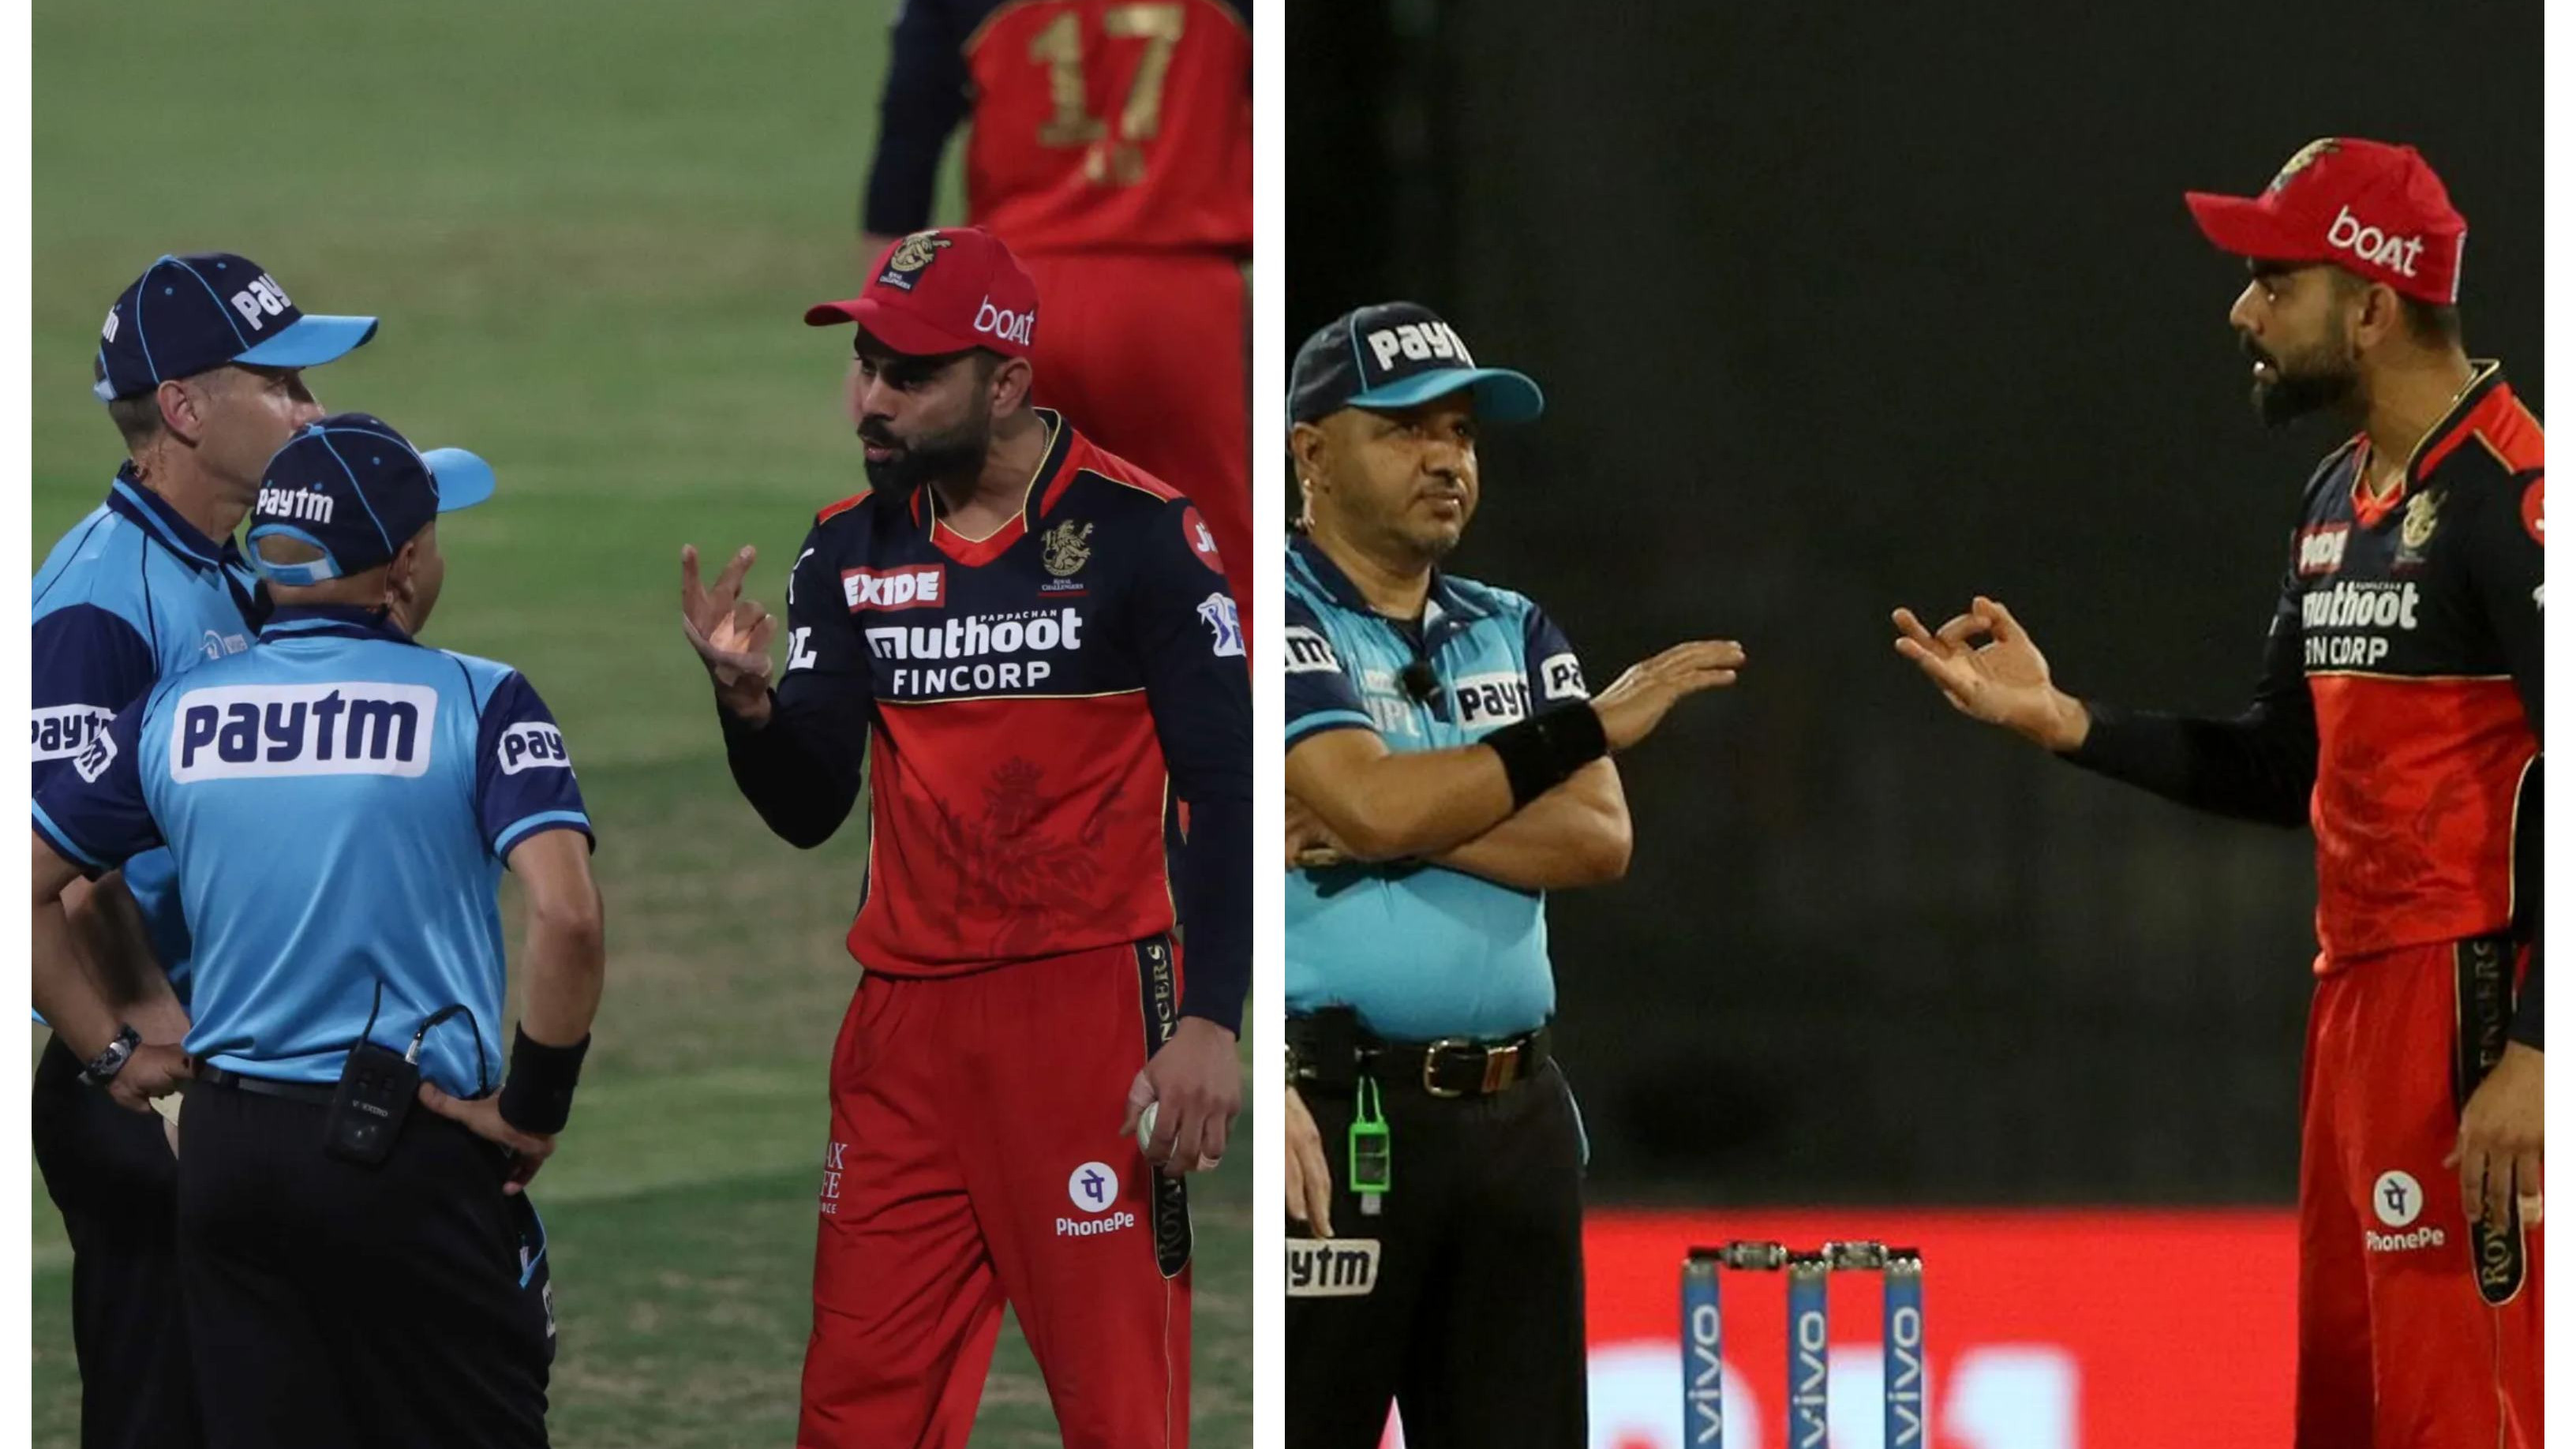 IPL 2021: WATCH – Virat Kohli argues with umpire over a leg before call in his last game as RCB captain